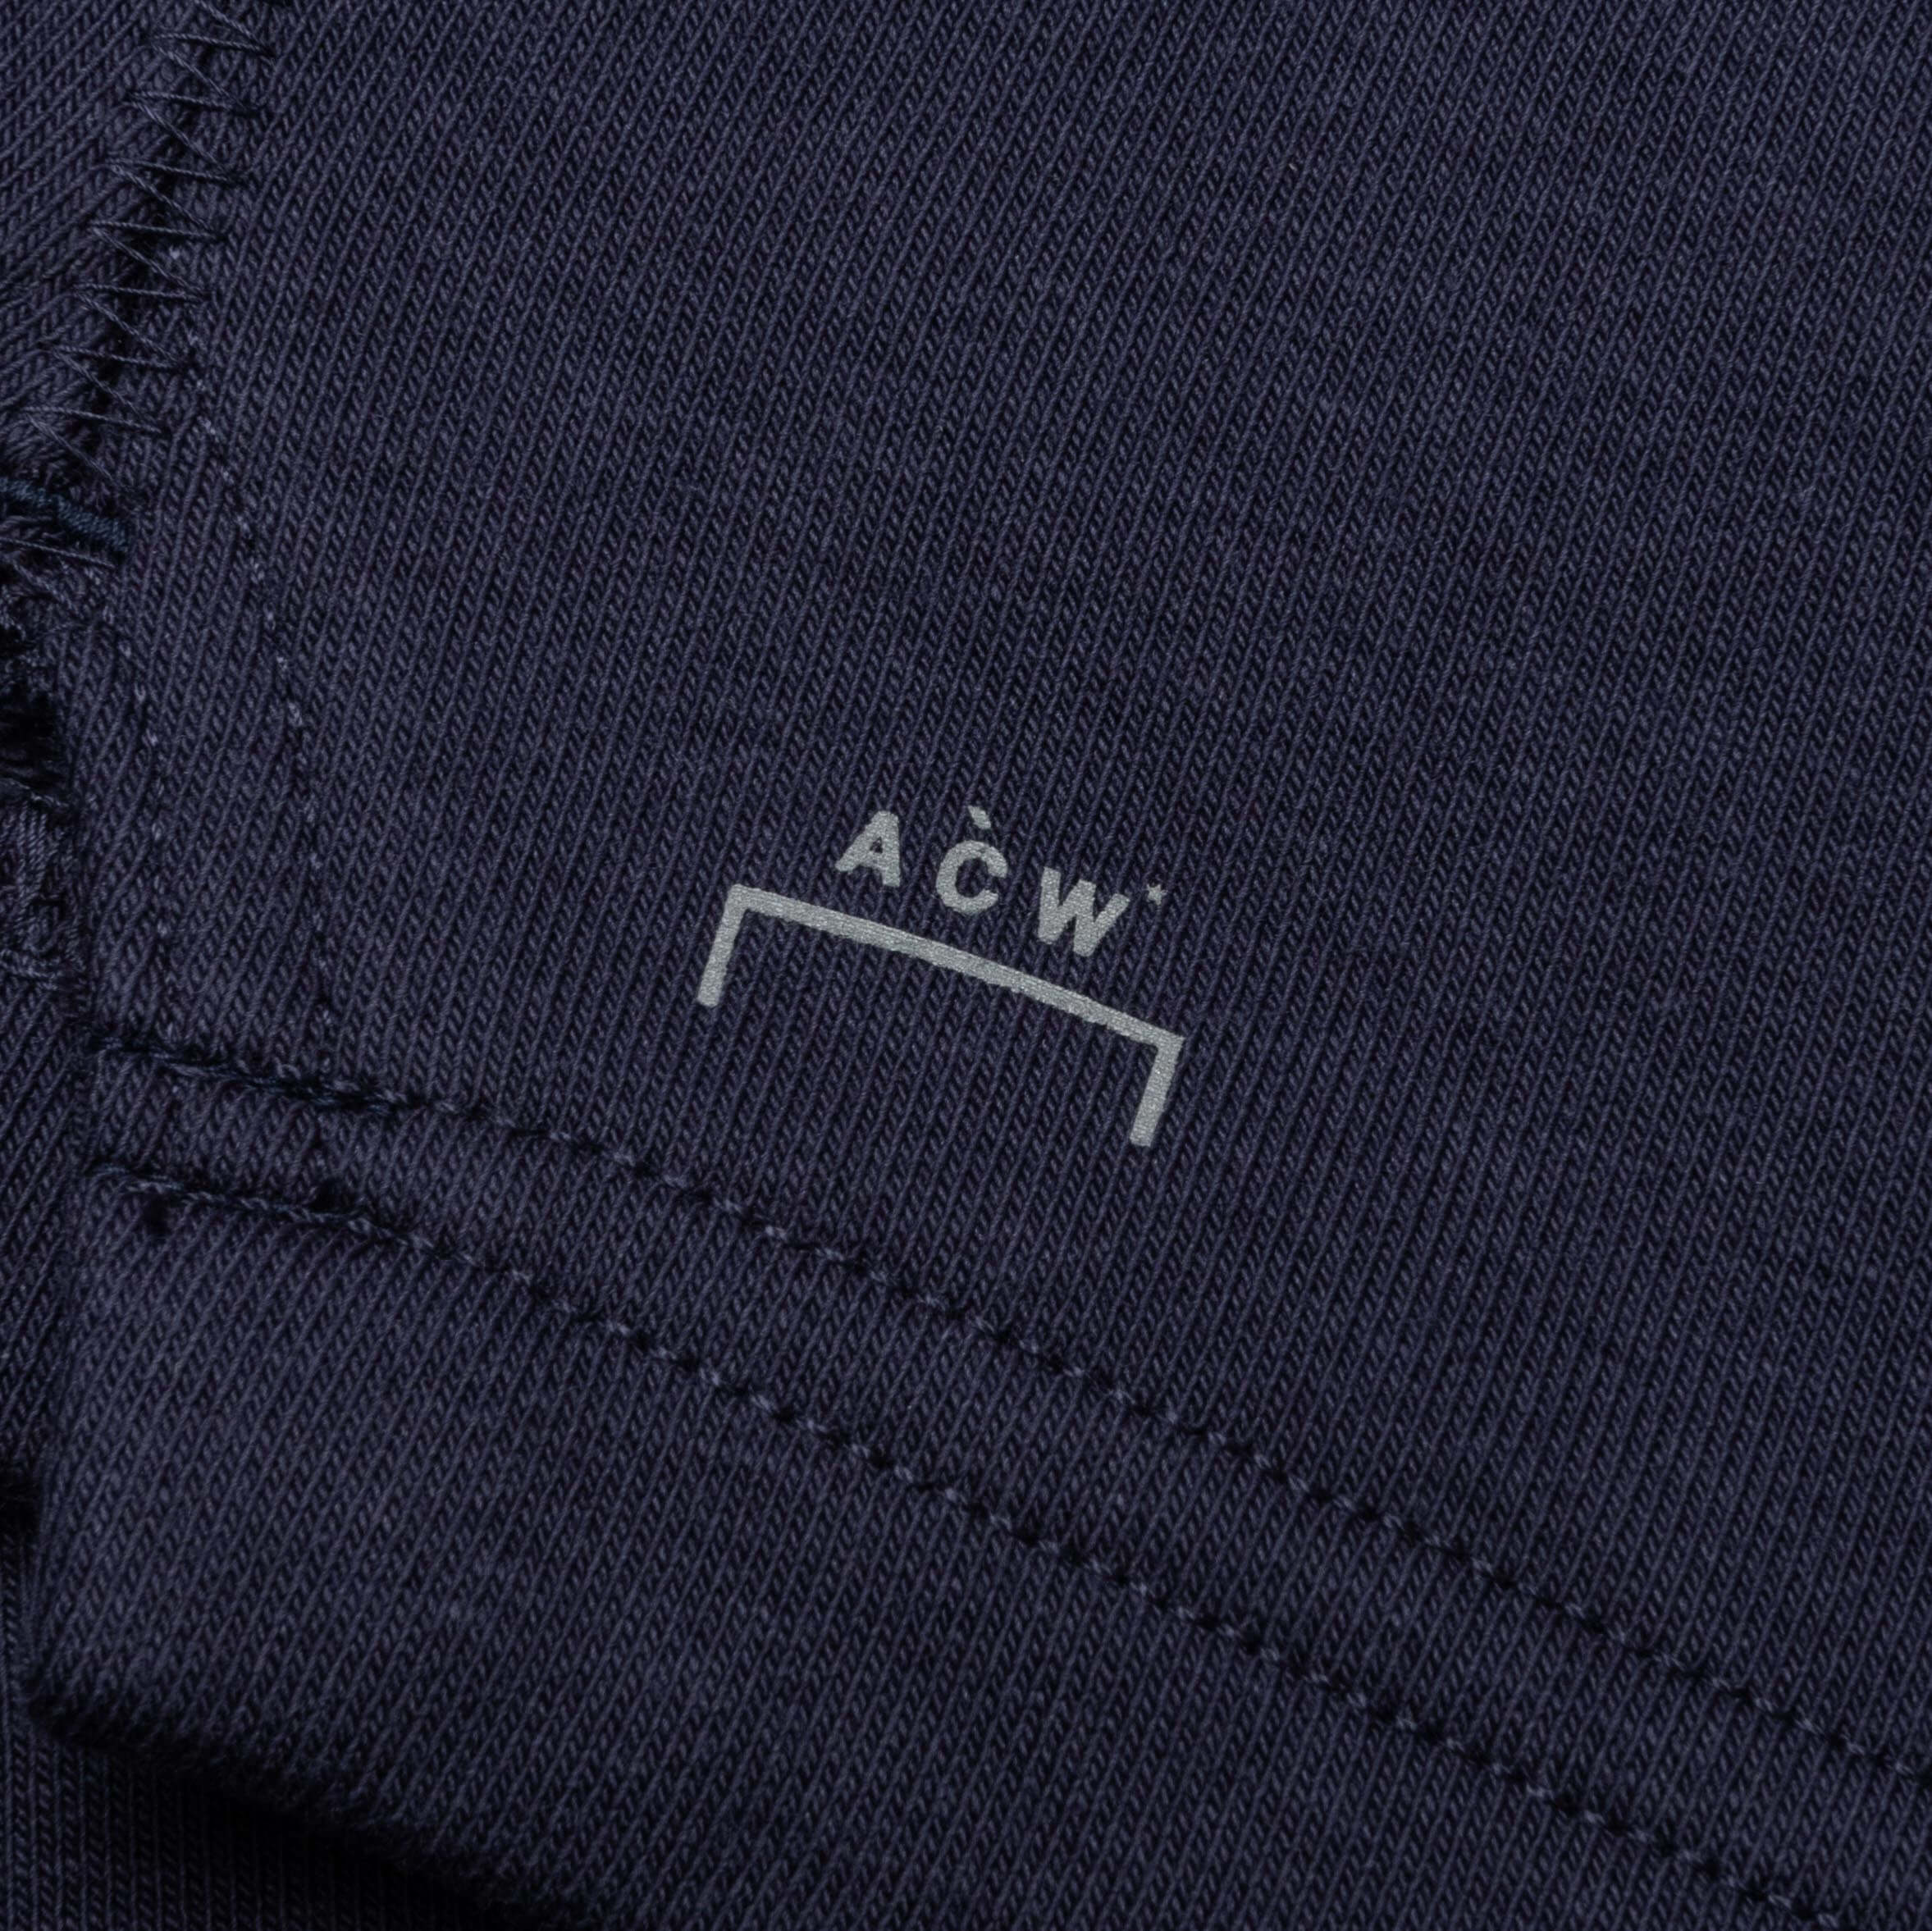 Converse x A-Cold-Wall Shorts - Navy, , large image number null